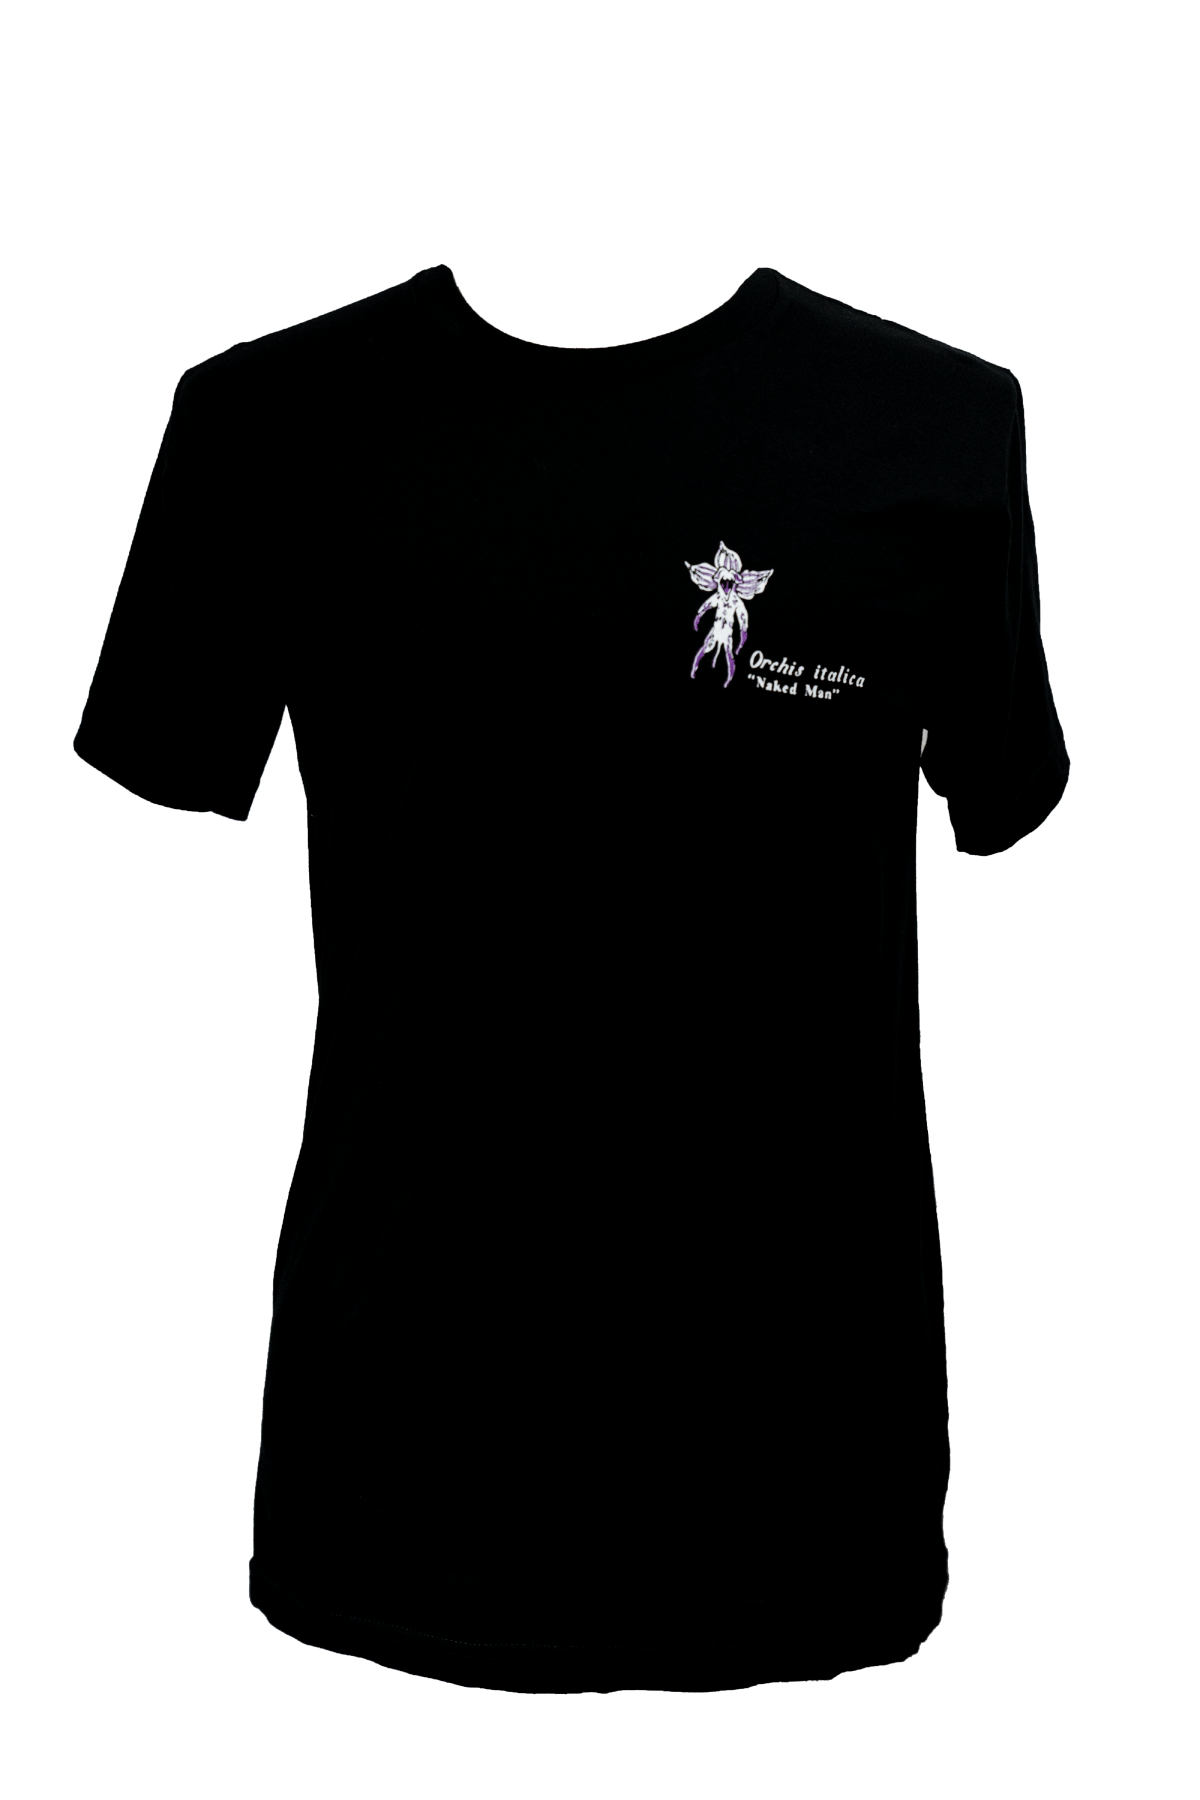 Orchis italica Short Sleeve Tee